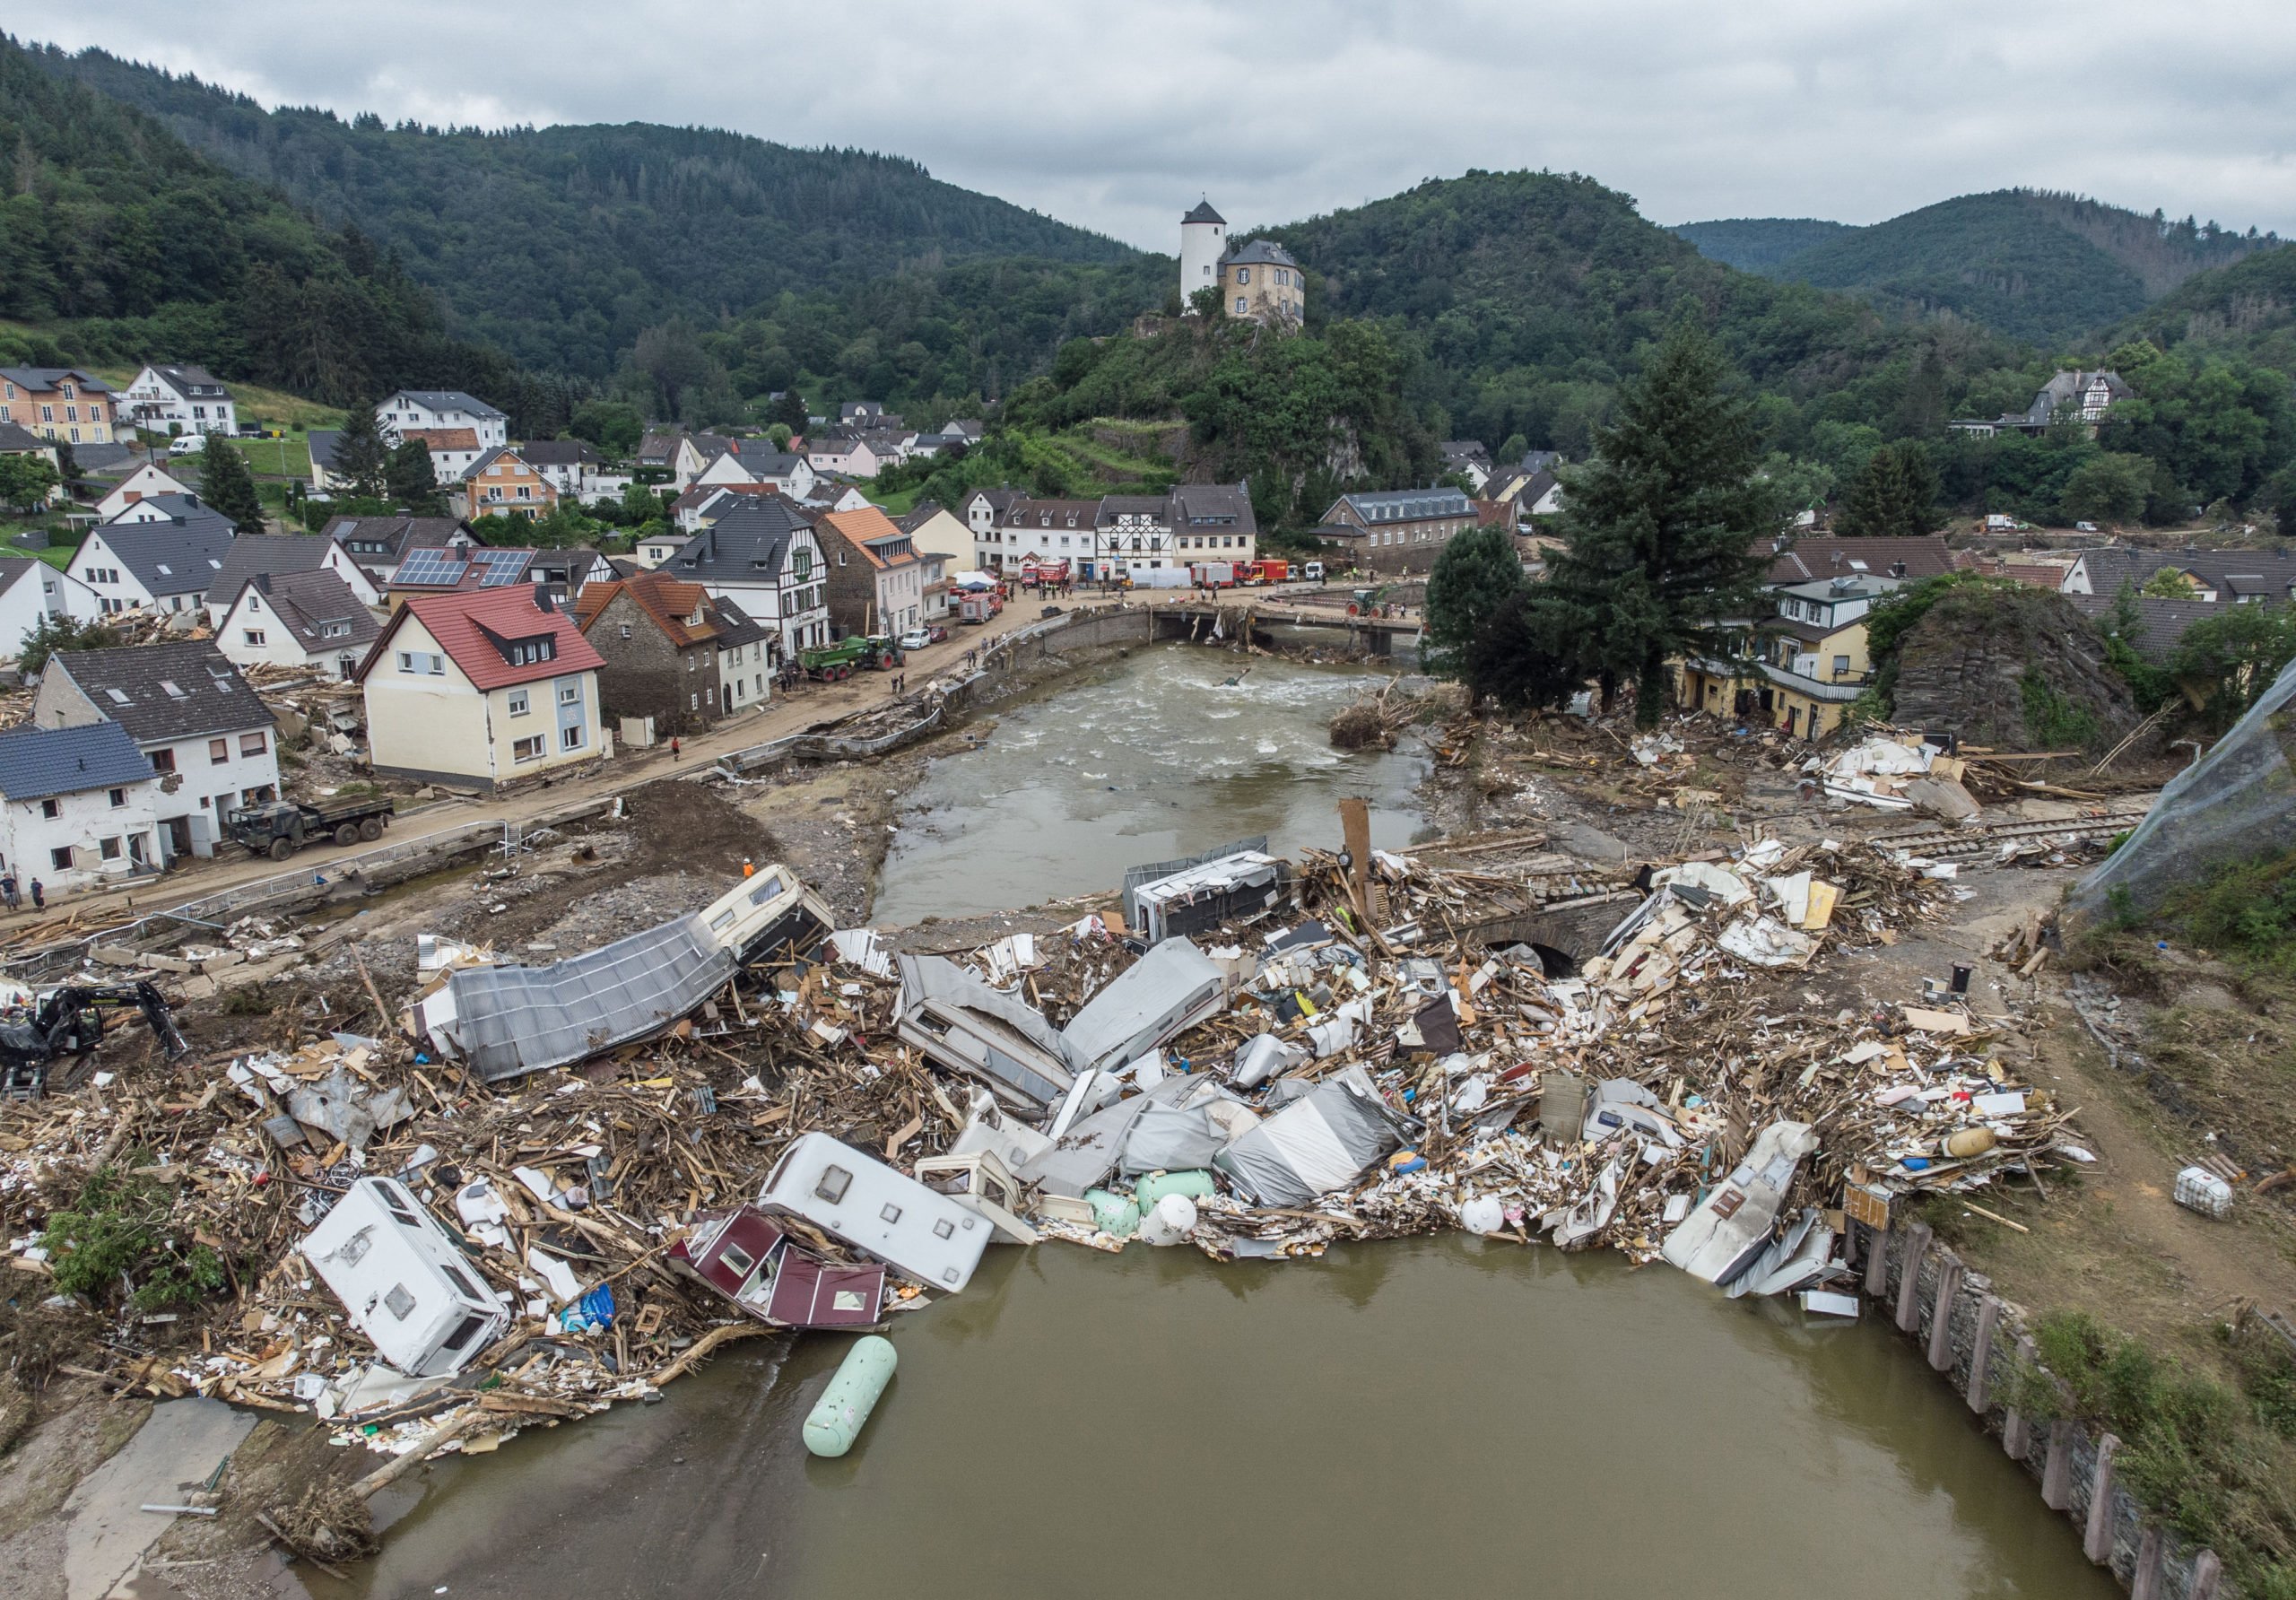 A view of the destruction caused by floods in Ahr in Altenahr-Kreuzberg on July 19th 2021.